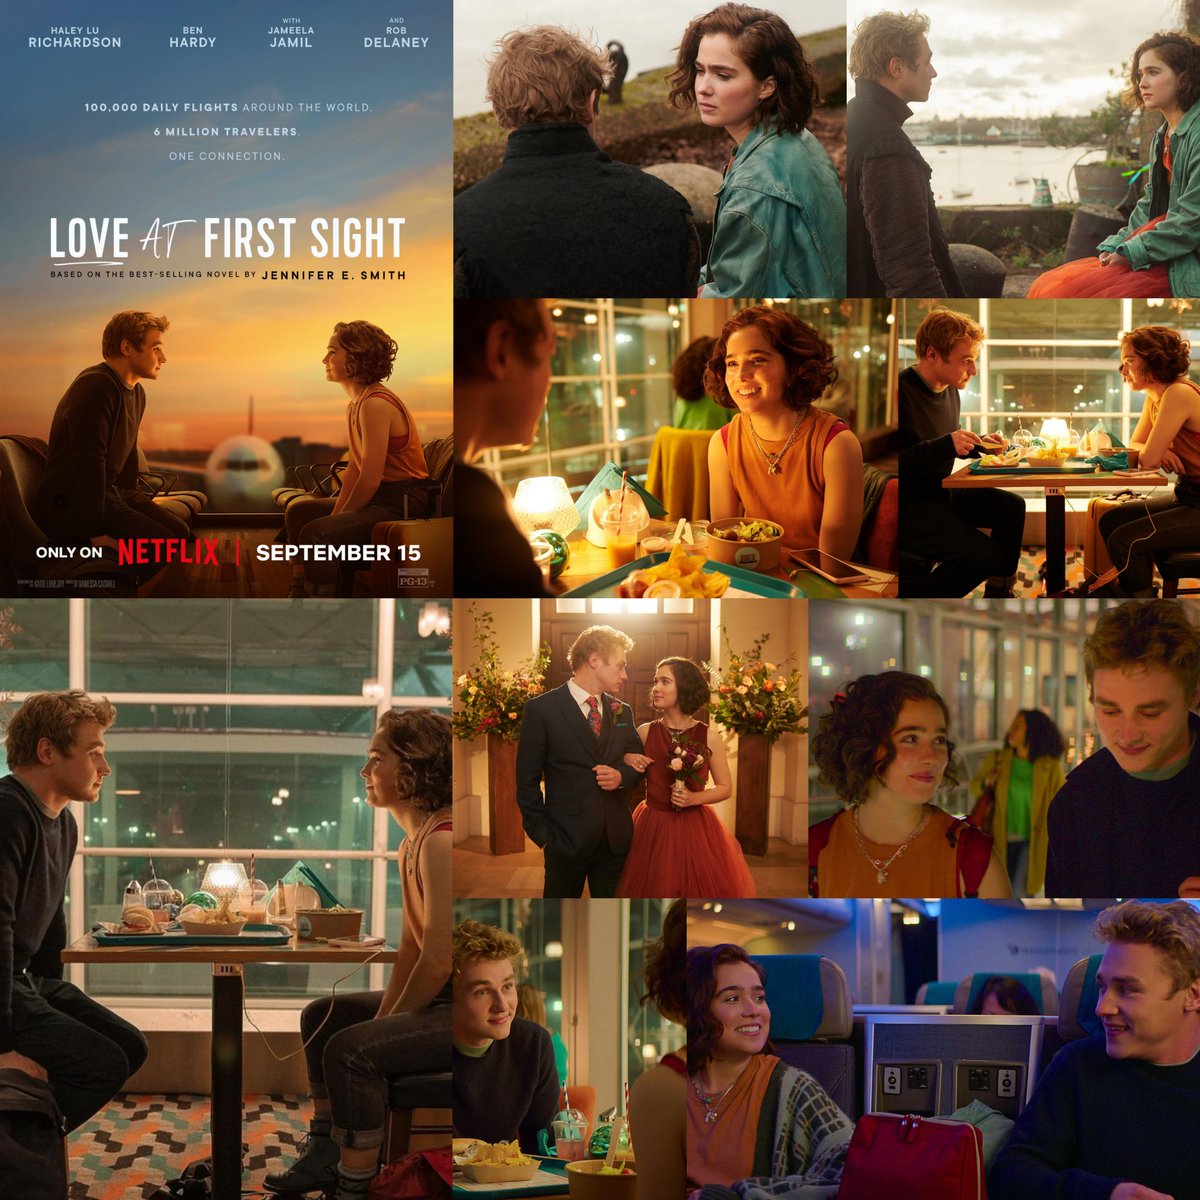 LOVE AT FIRST SIGHT(2023)
Such a cute romcom film.💛 

Hadley & Oliver had a rough past but they risked everything to meet again. Fate must have brought them back together.💓💖 

Unexpected chemistry of Haley & Ben.💕

#LoveAtFirstSight #HaleyLuRichardson #BenHardy #NetflixPH